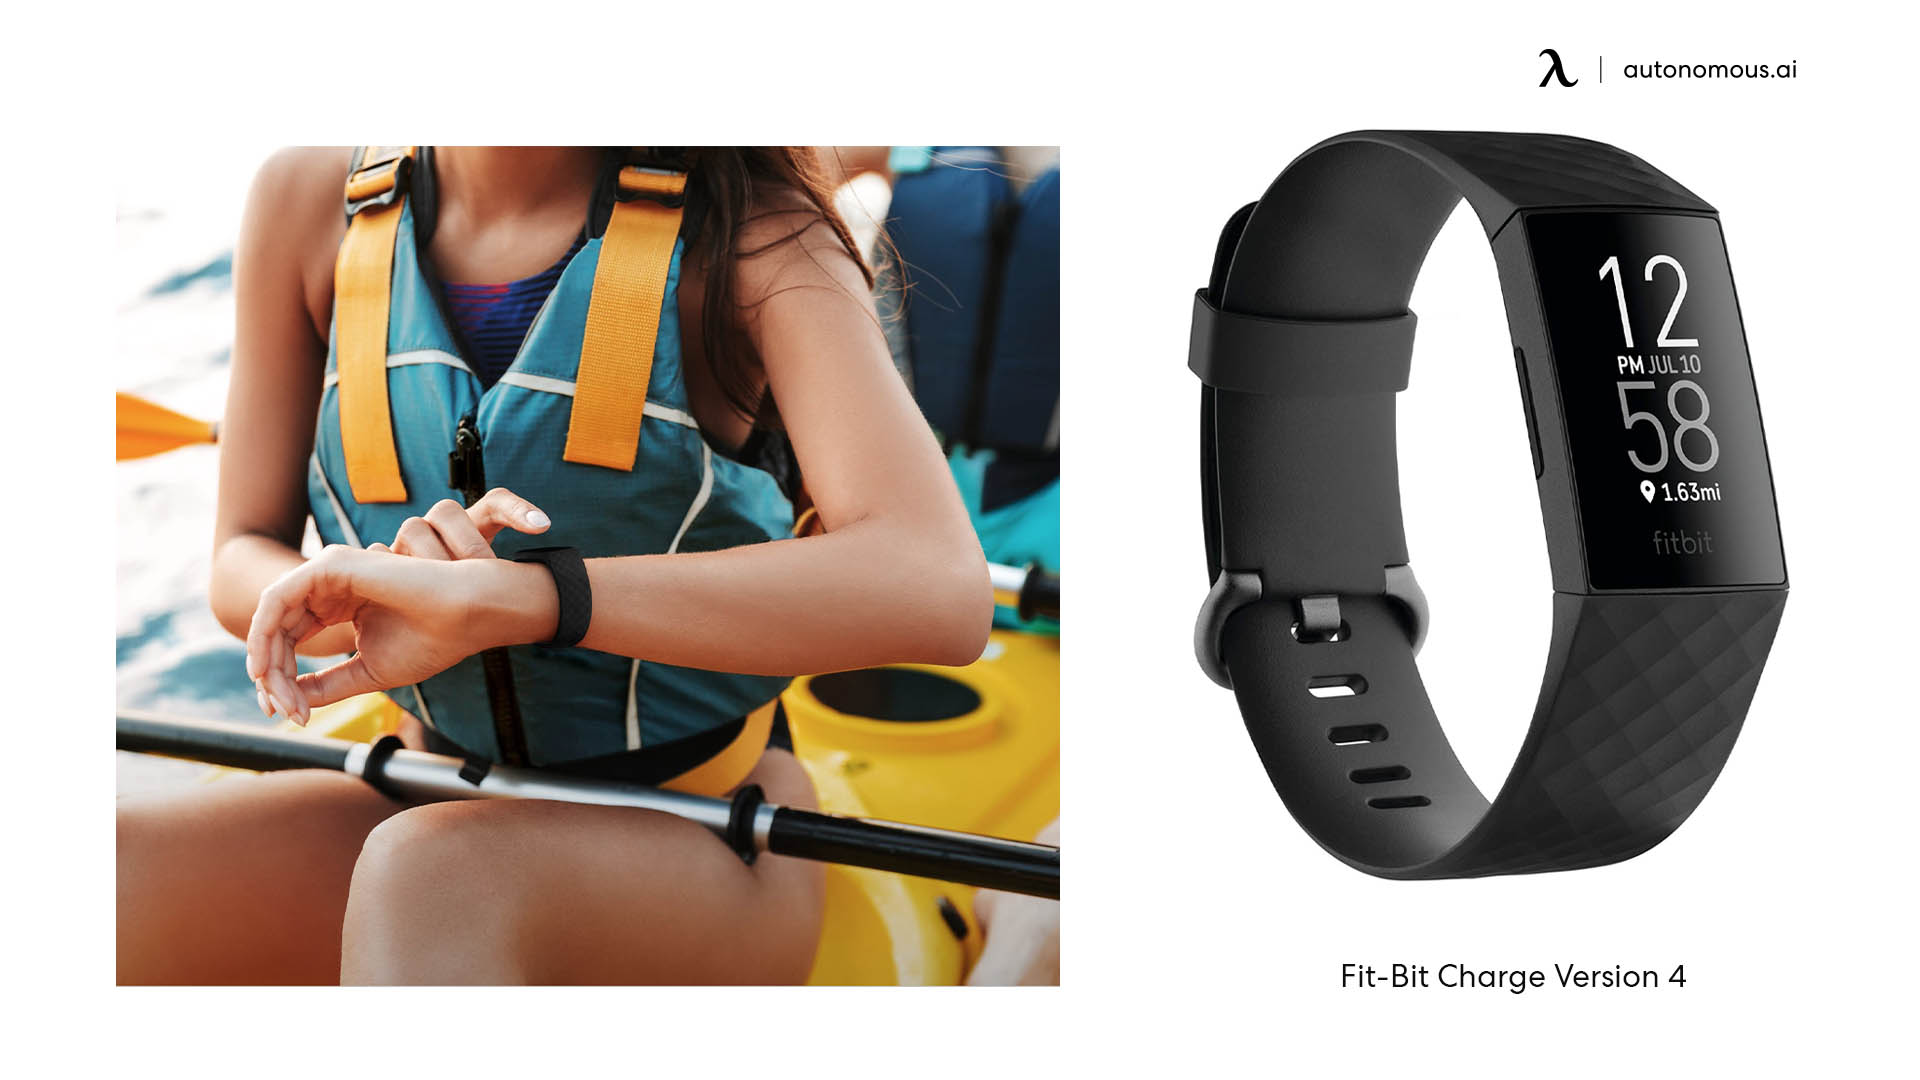 Fit-Bit Charge Version 4 is rated the top overall on fitness watch reviews.